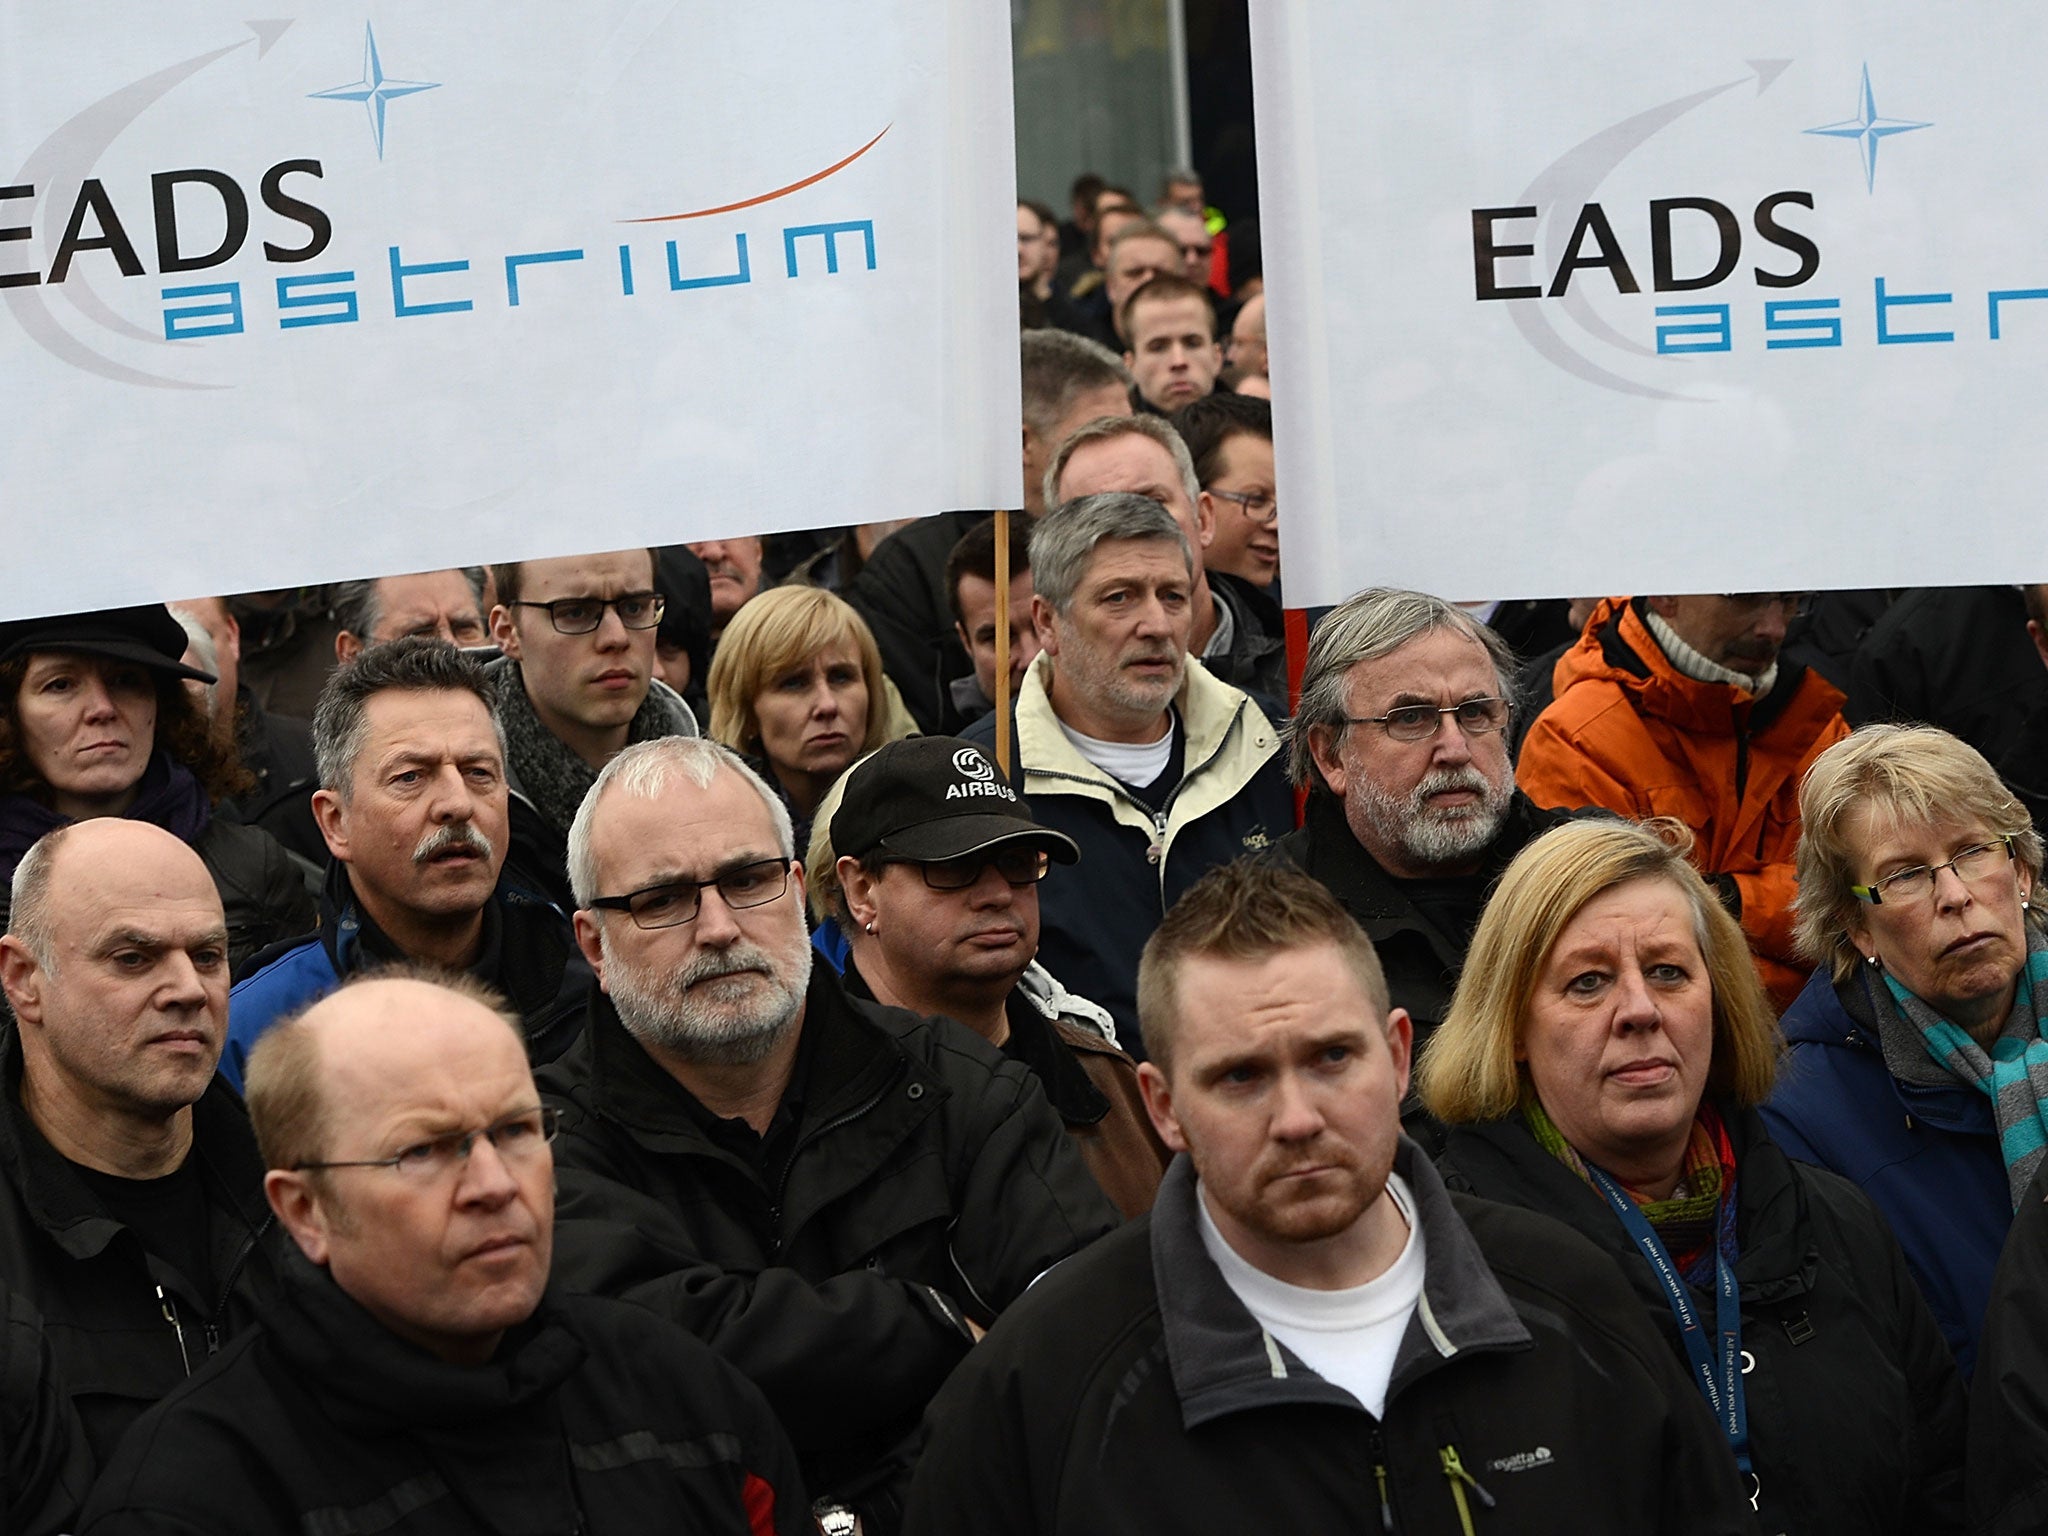 EADS to cut more than 5,000 jobs across Europe in